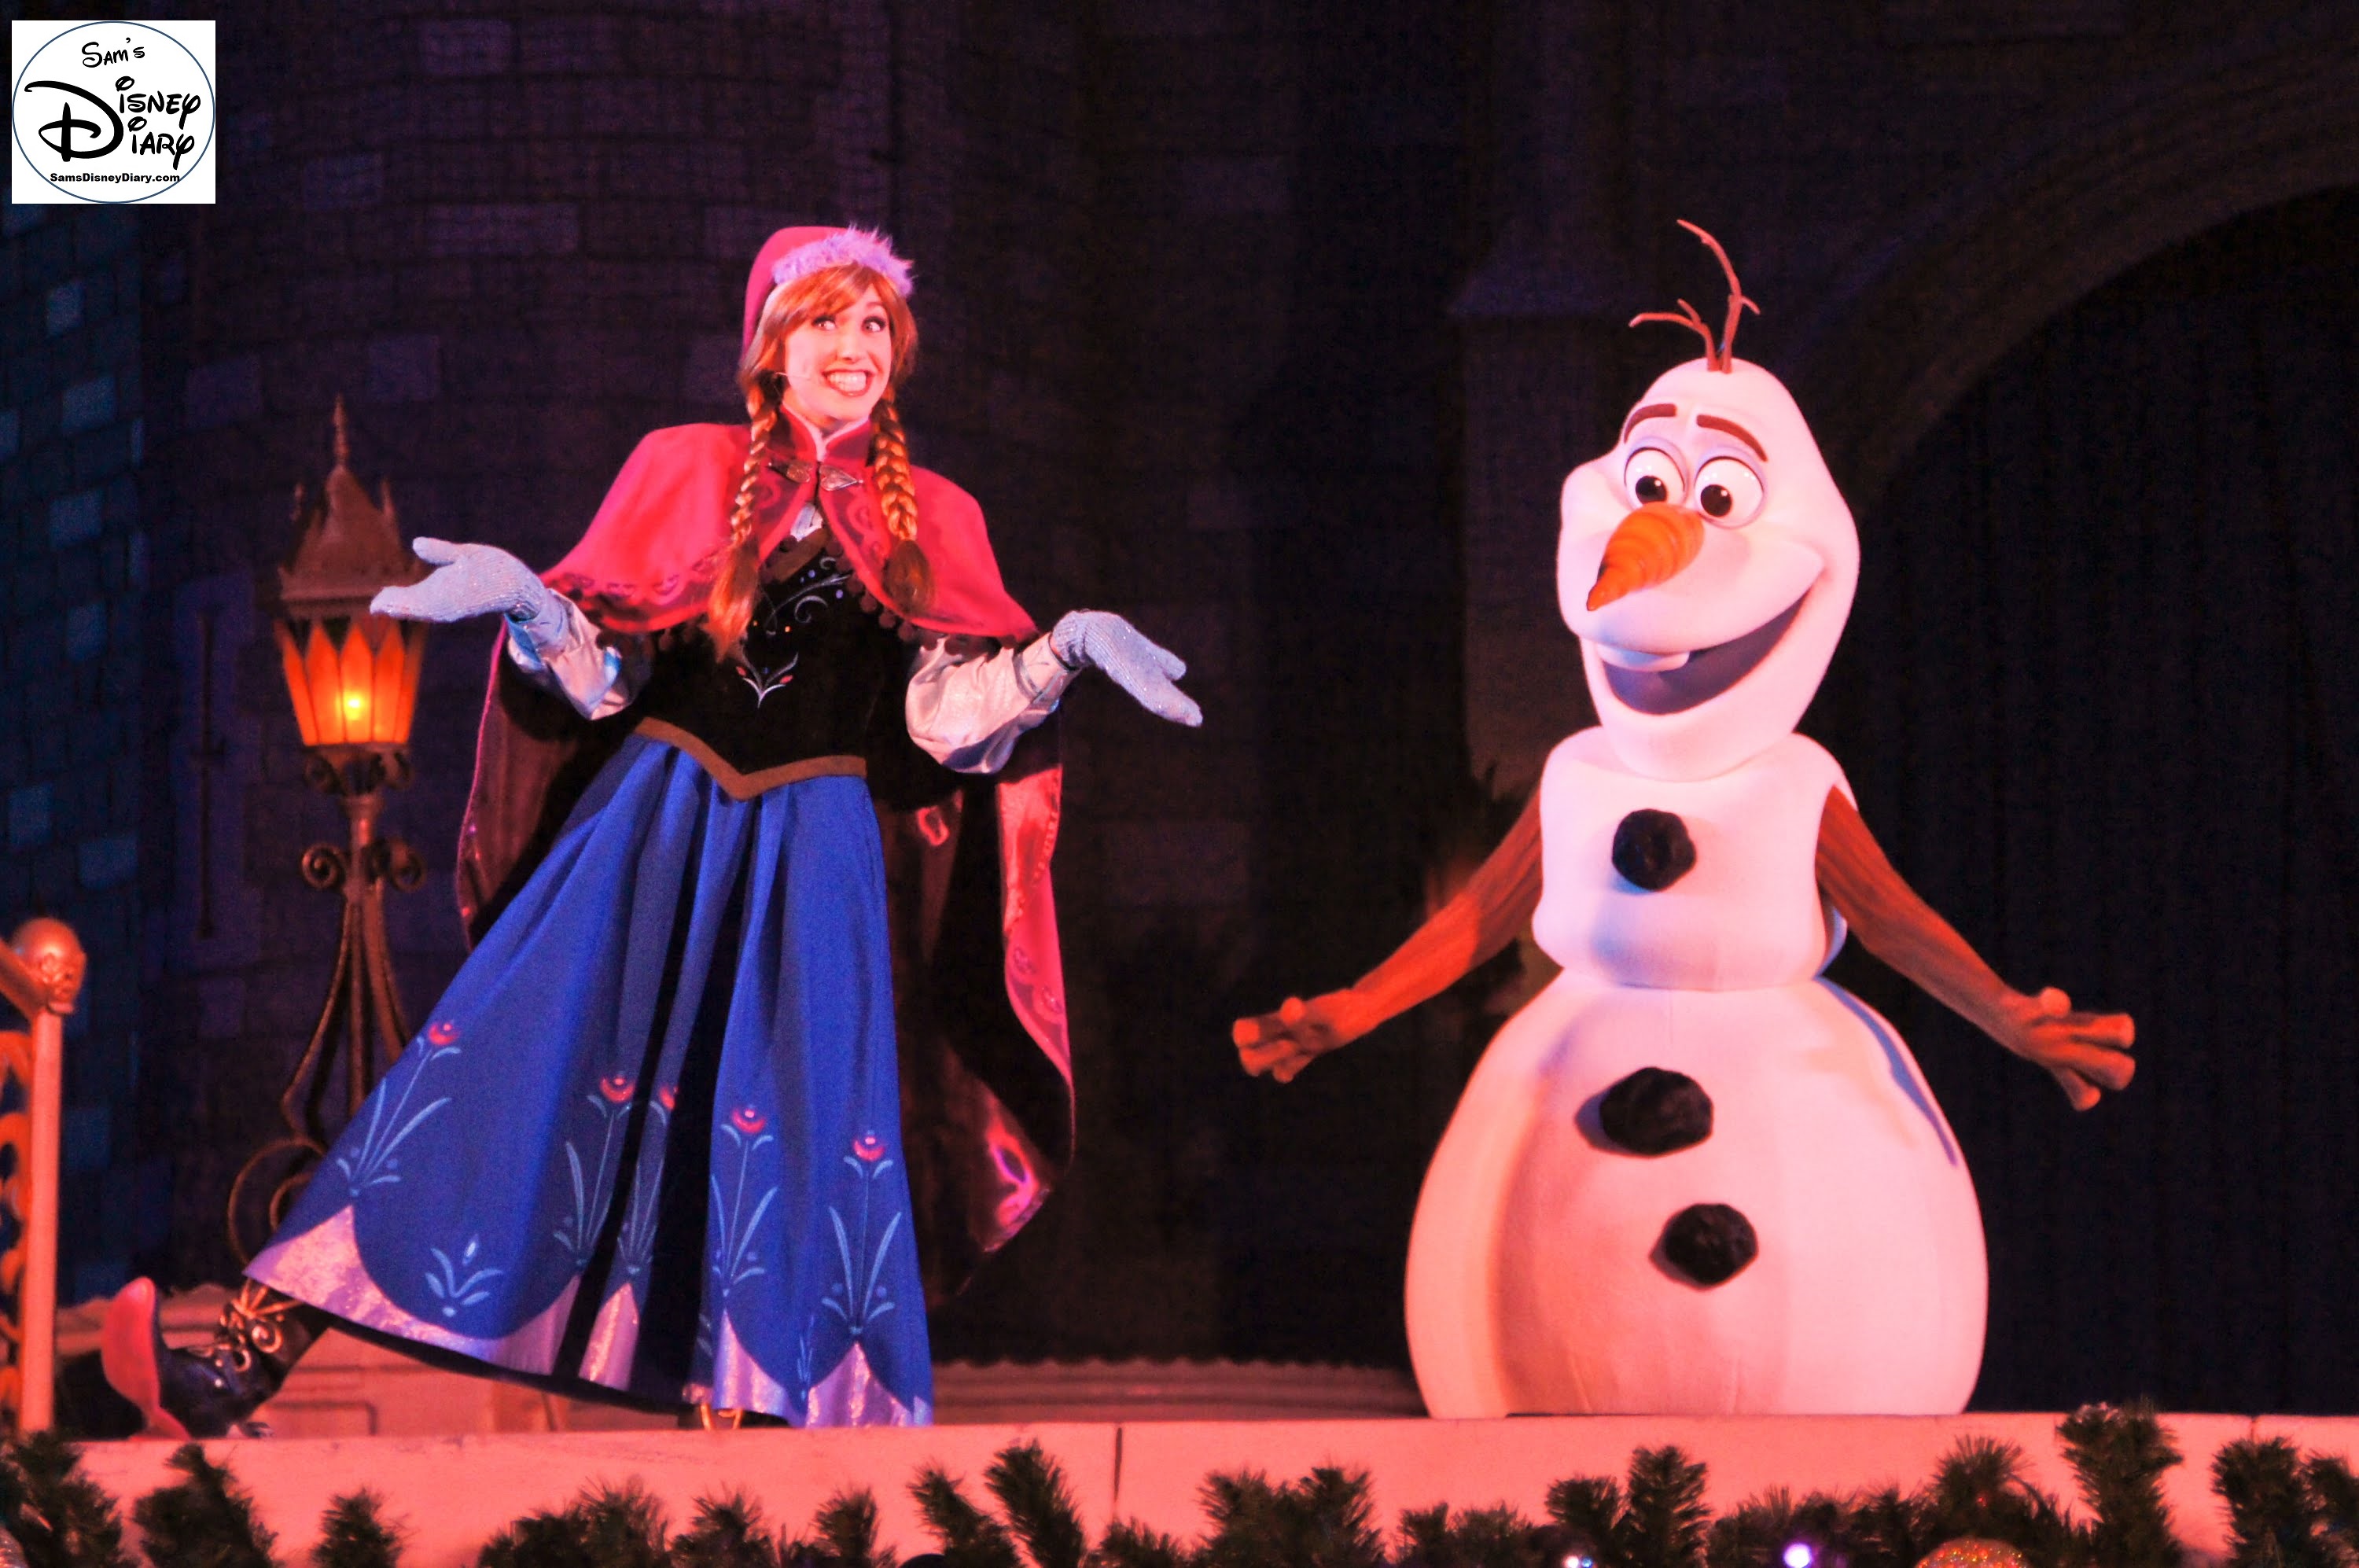 Sams Disney Diary #65 - Anna and the new Talking Olaf as they appeared during the 2015 Frozen Holiday Wish